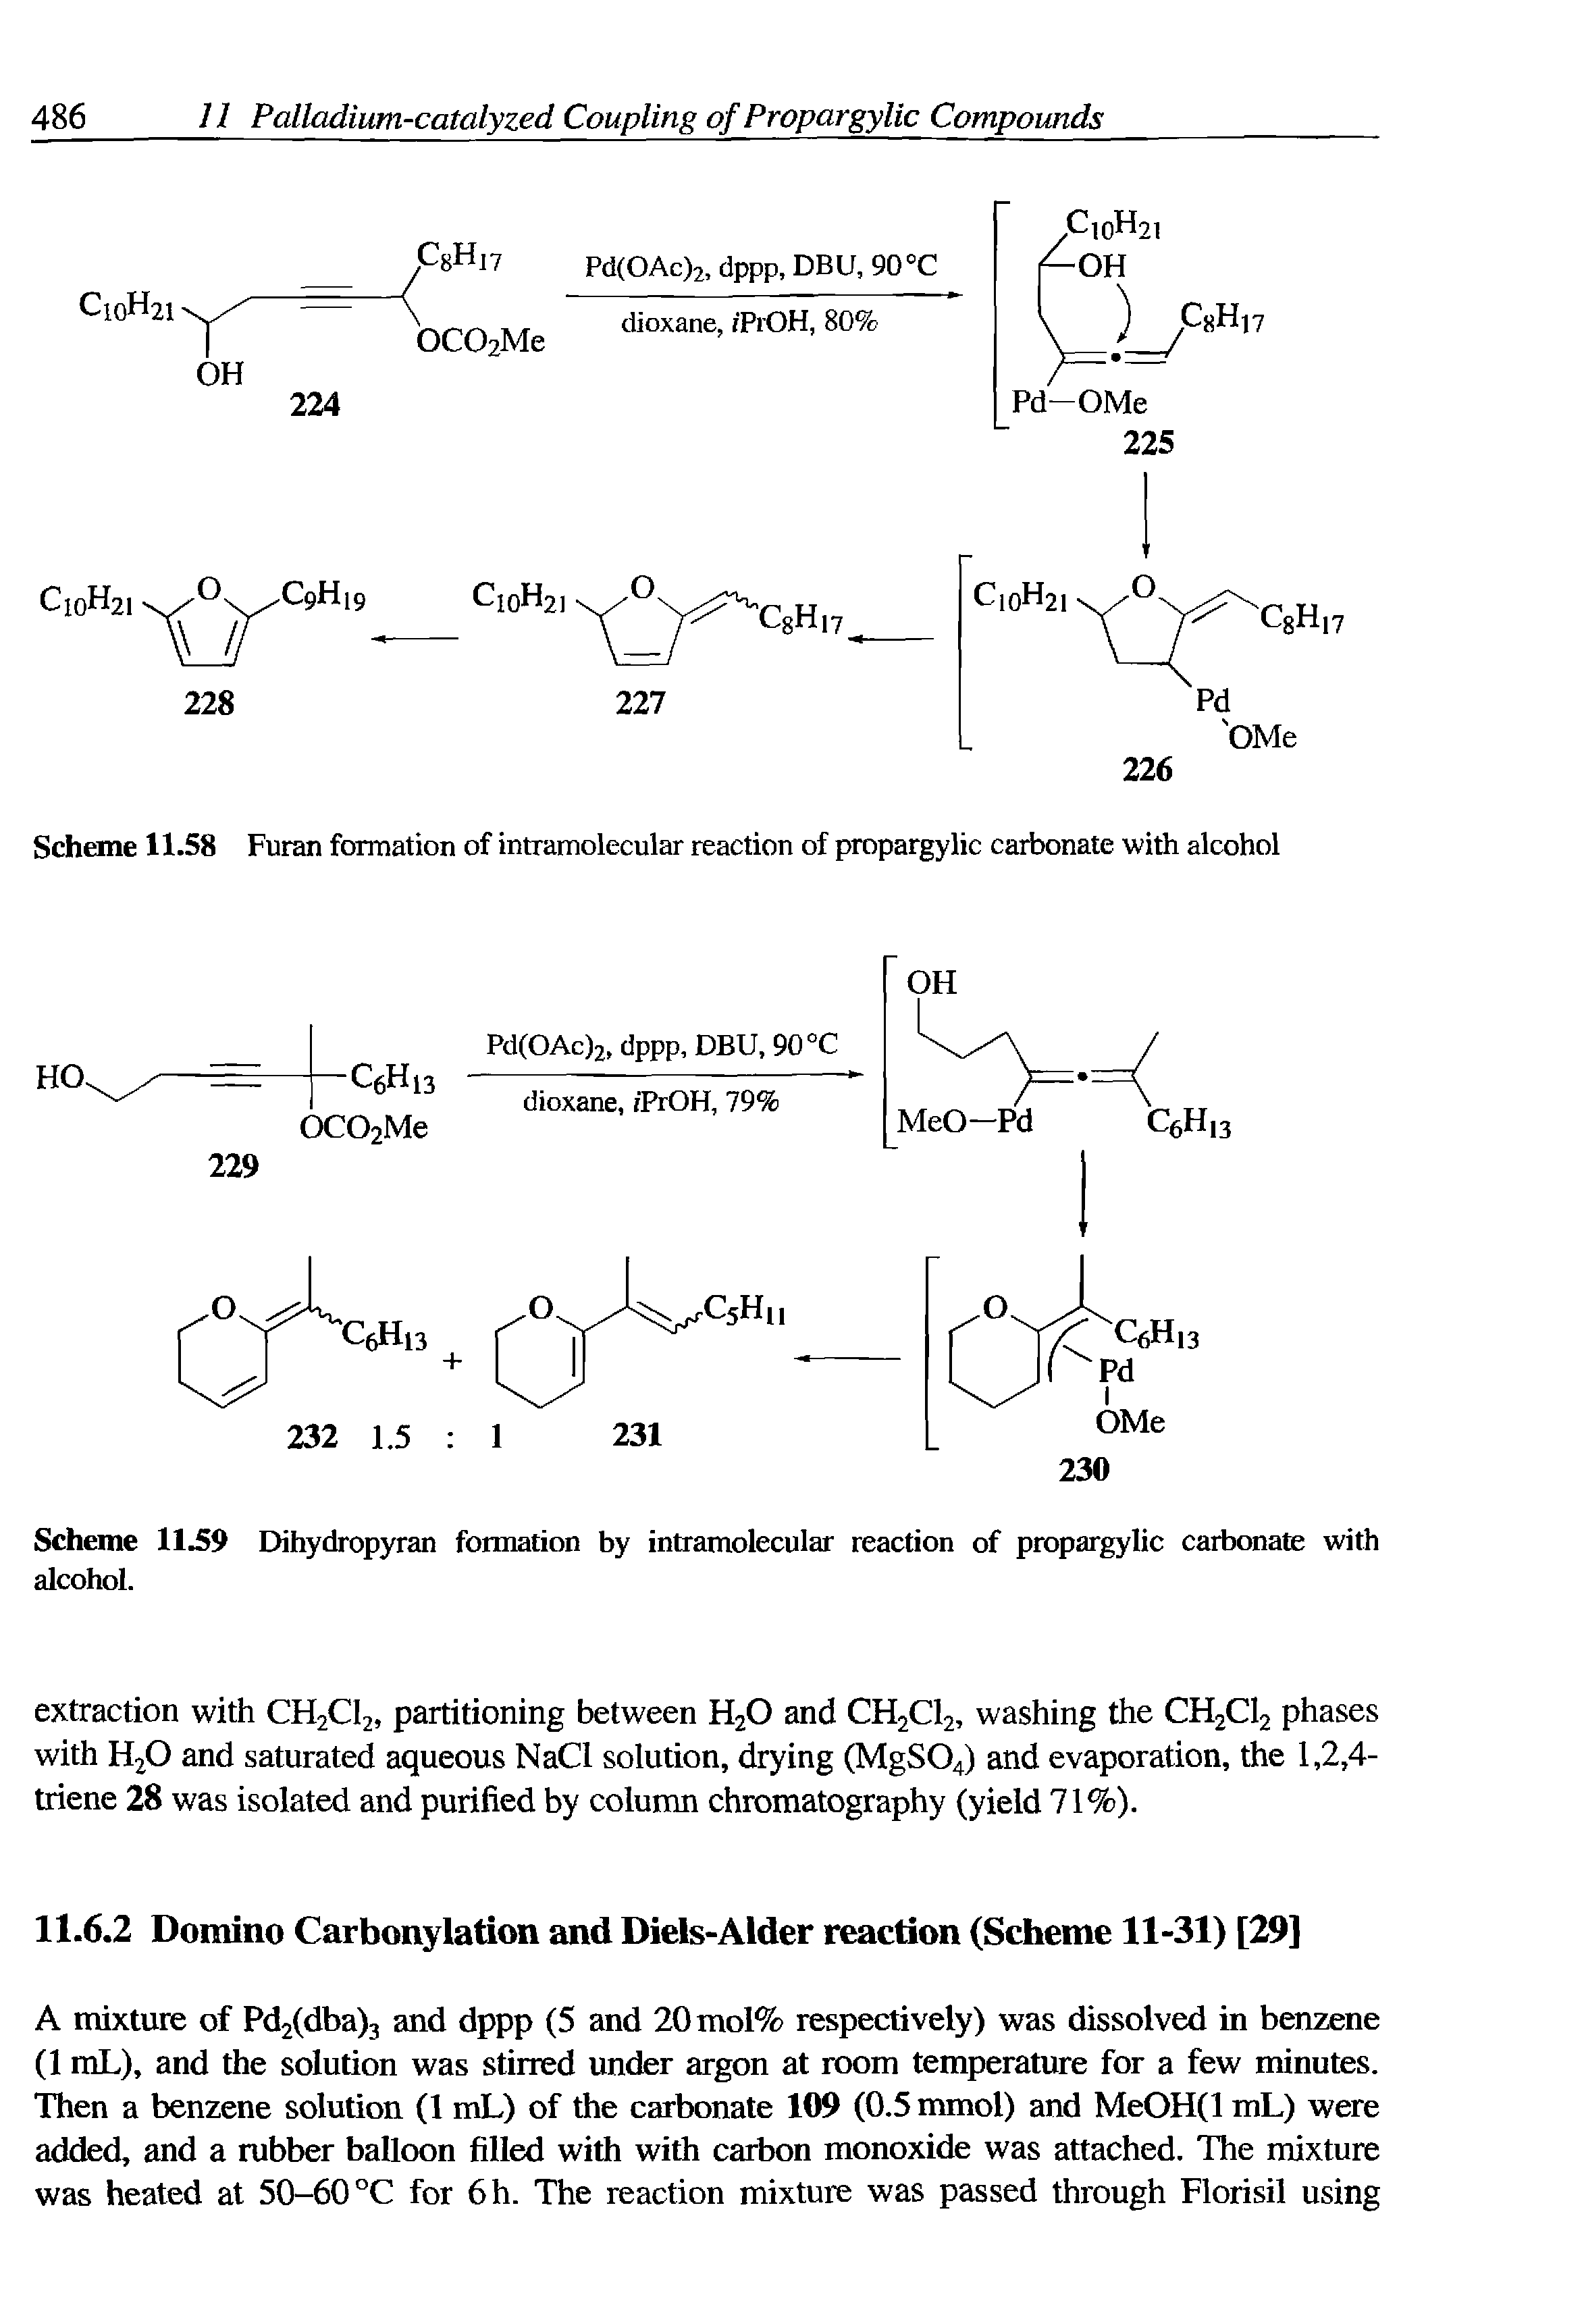 Scheme 11.59 Dihydropyran formation by intramolecular reaction of propargylic carbonate with alcohol.